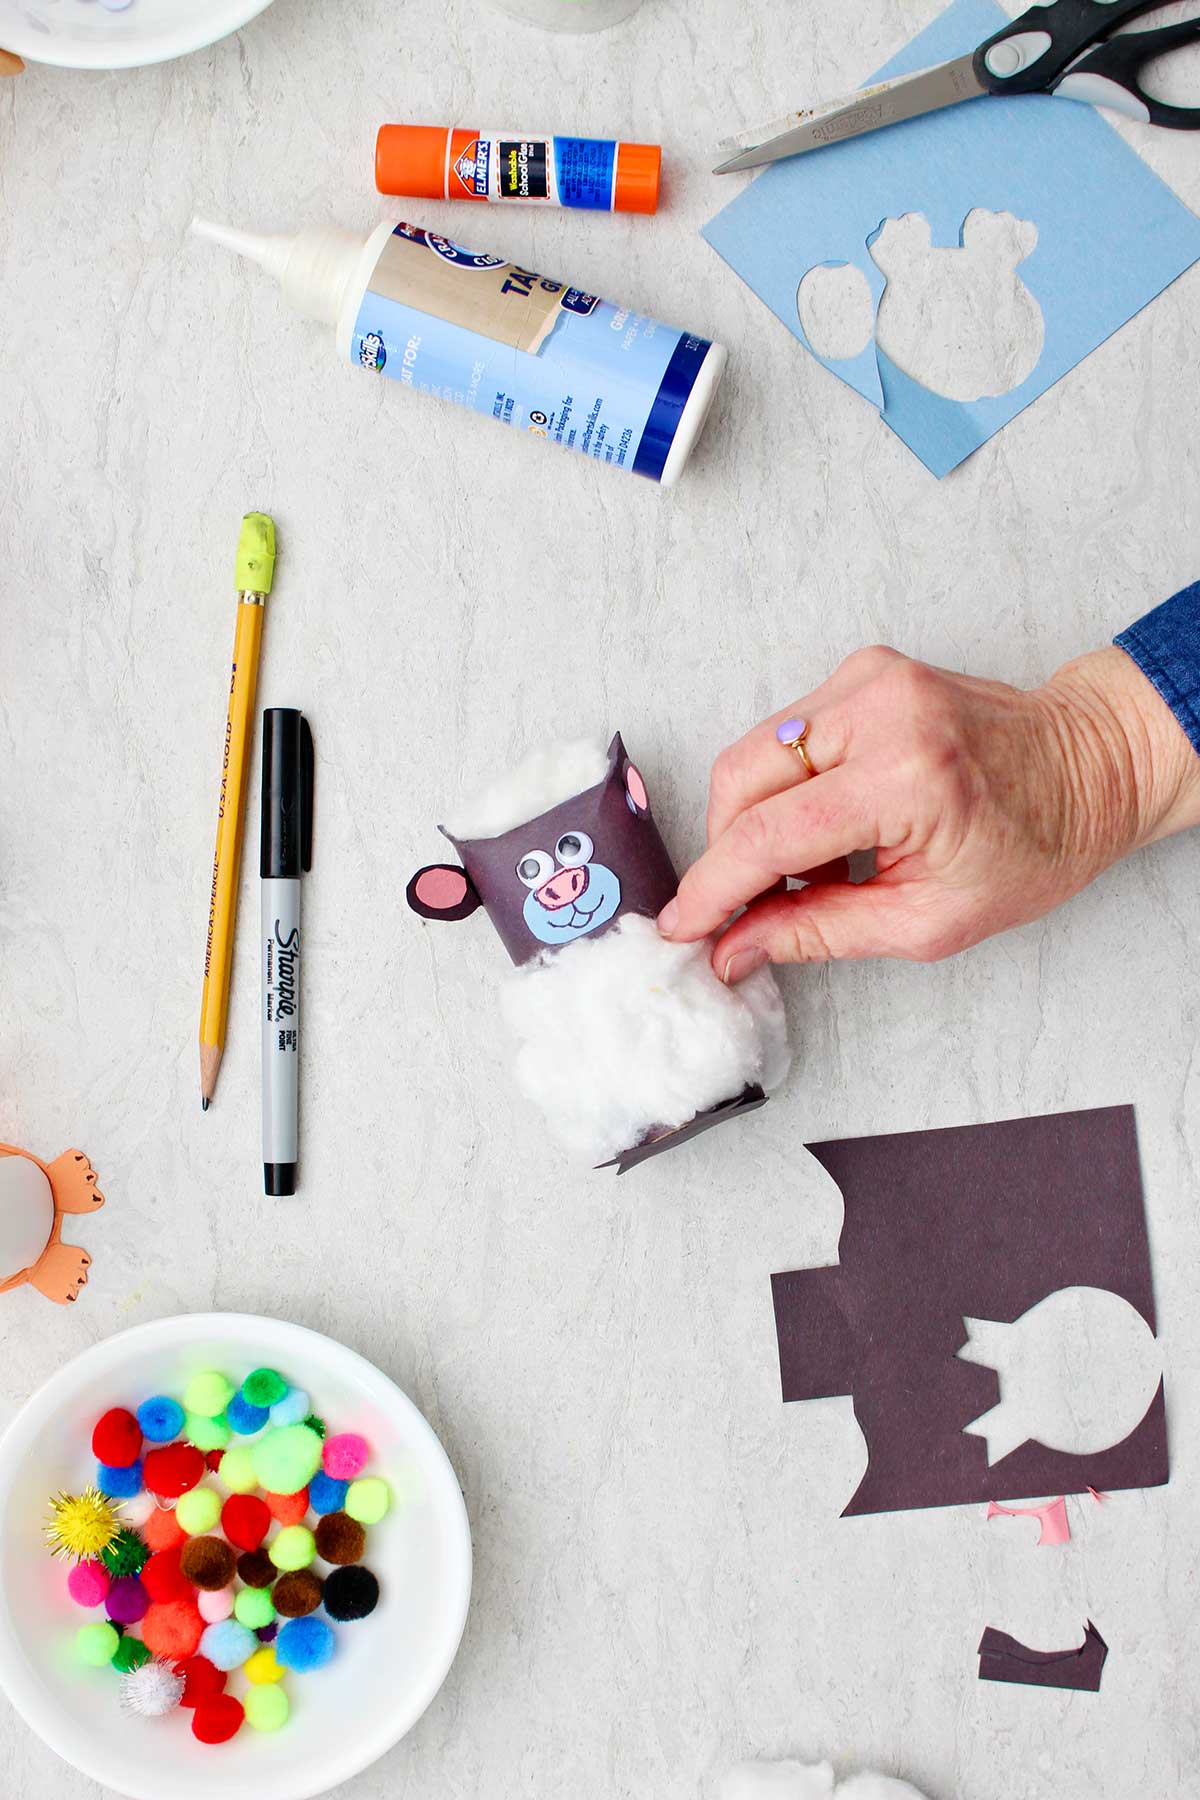 Hand adding cotton ball details to sheep toilet paper roll animal.